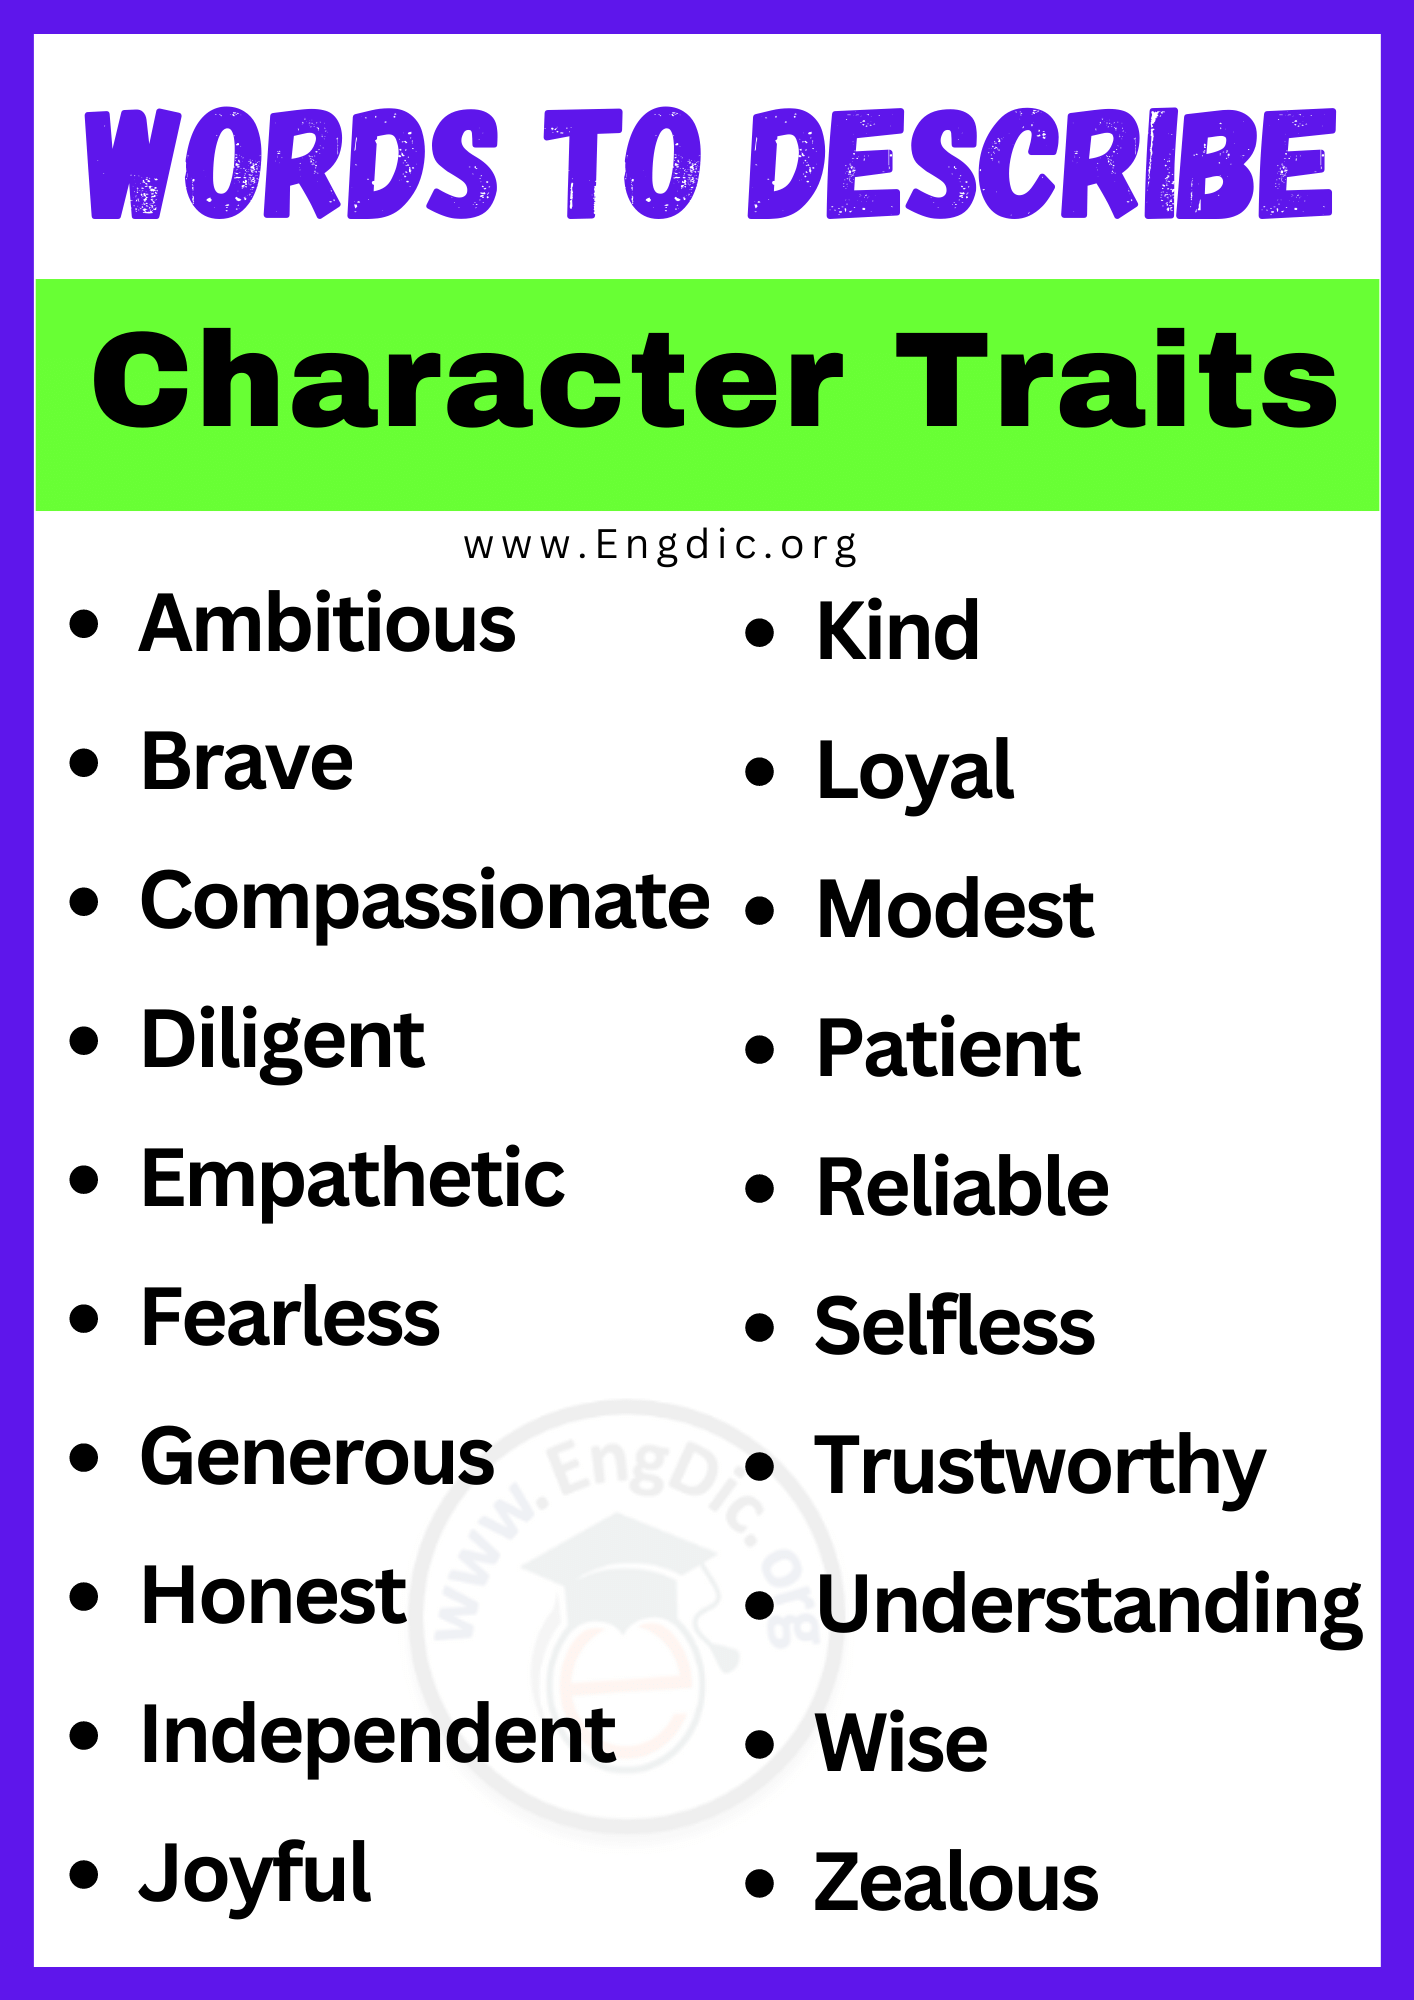 Words to Describe Character Traits